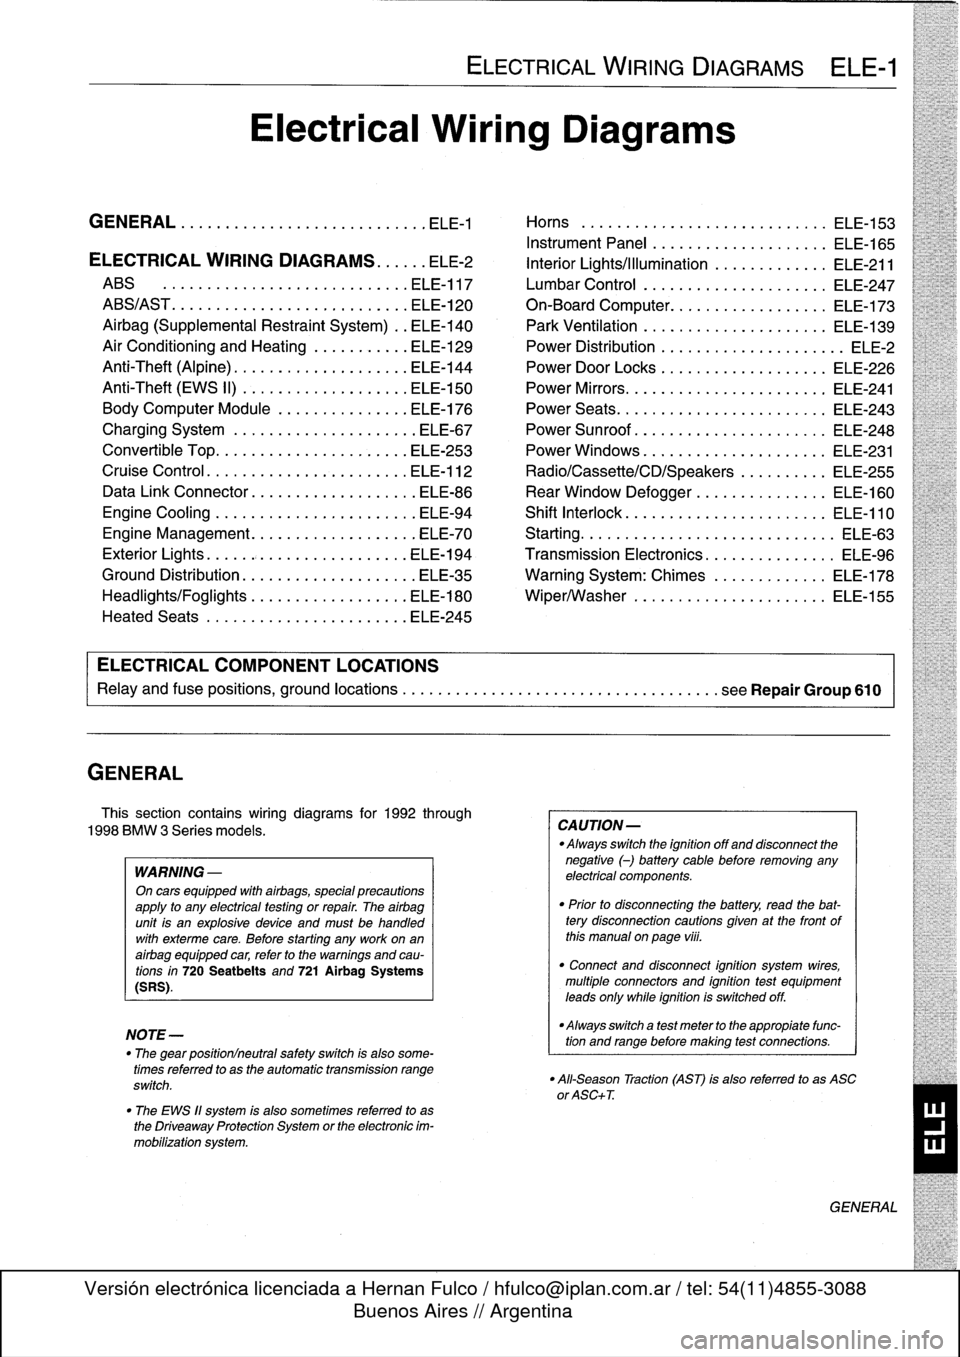 BMW 323i 1995 E36 Owners Manual 
GENERAL

This
section
contains
wiring
diagrams
for
1992
through

1998
BMW
3
Series
models
.

WARNING
-

On
cars
equipped
with
airbags,
special
precautions
apply
to
any
electrical
testing
or
repair
.
